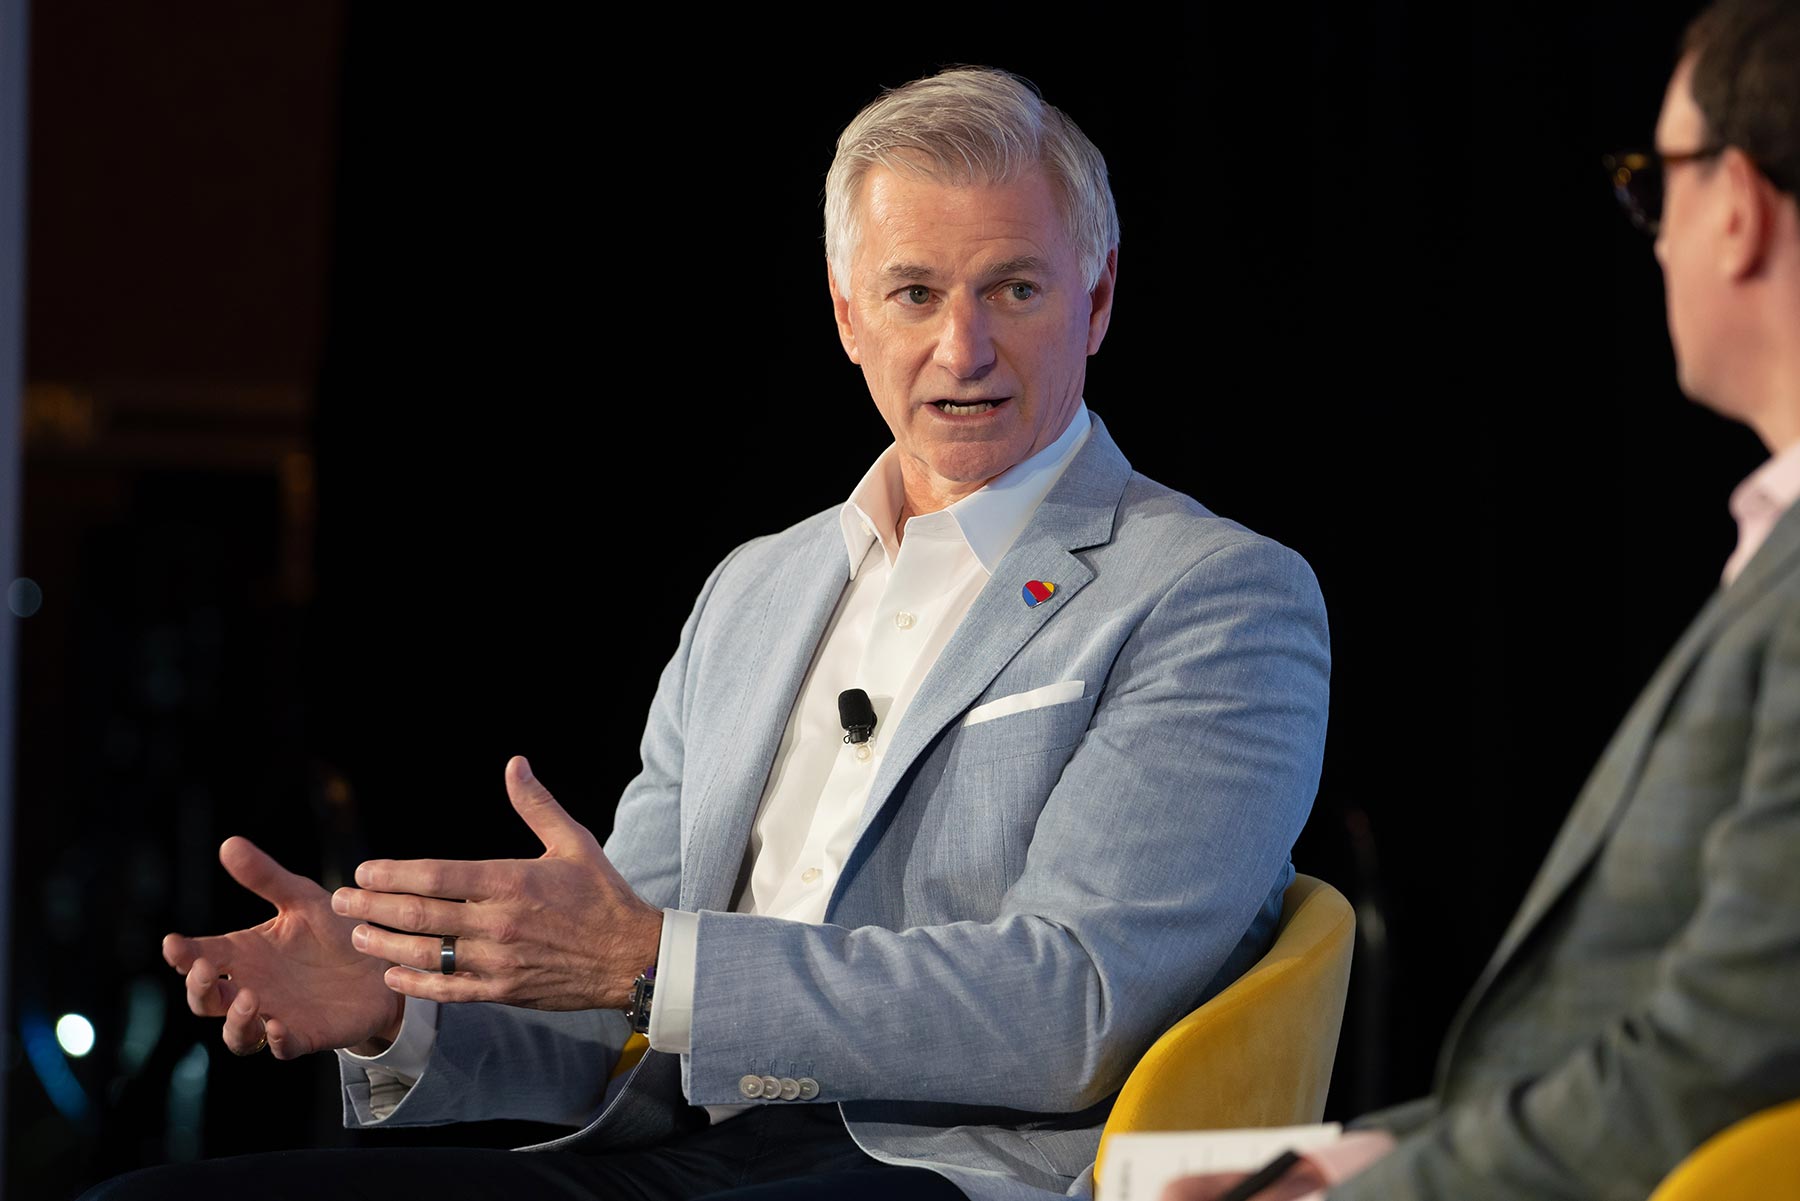 Bob Jordan, Southwest Airlines president and CEO, speaks on stage at the Skift Aviation Forum in Fort Worth, Texas, November 2023. Skift